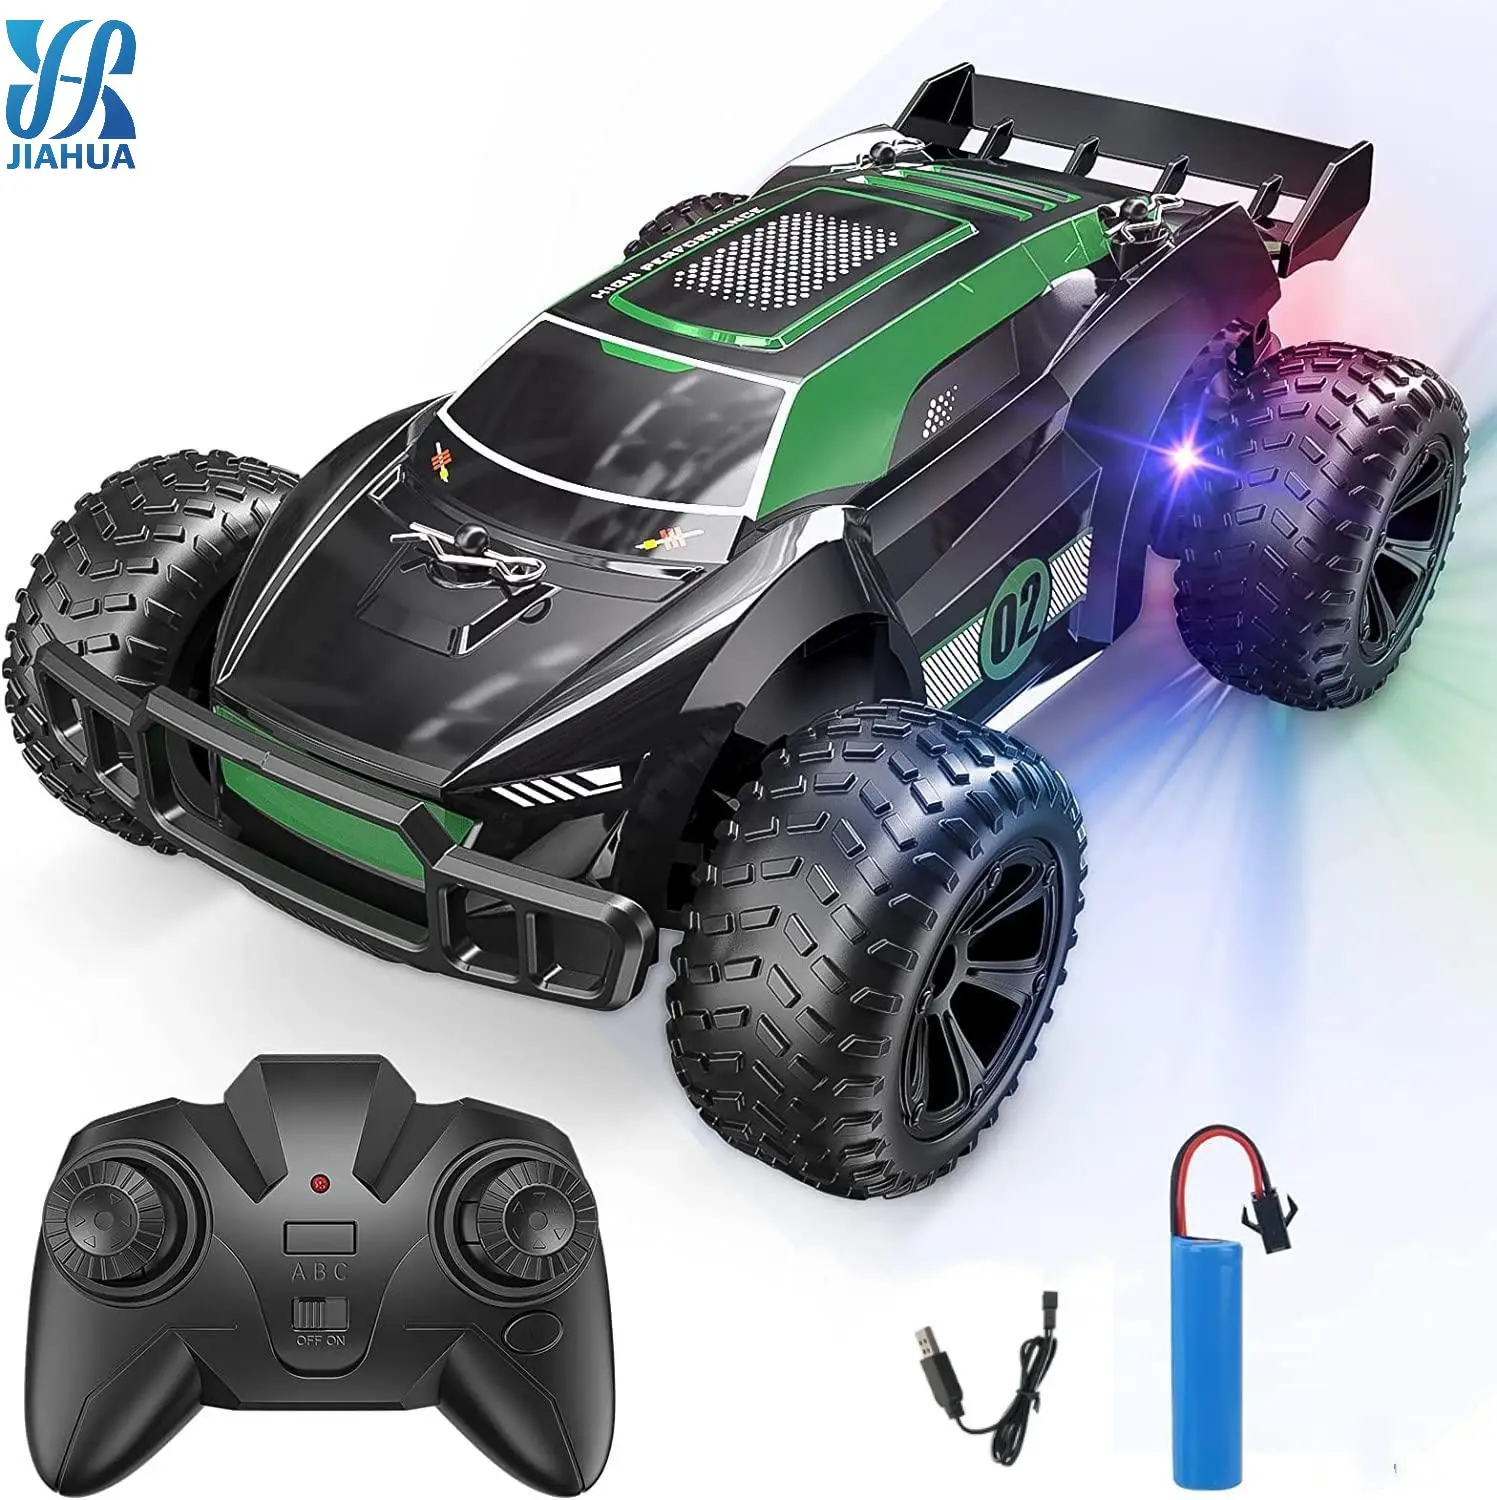 2WD Remote Control Car 2.4G High Speed Electric Car With Wheel Lights Shock RC Racing Car